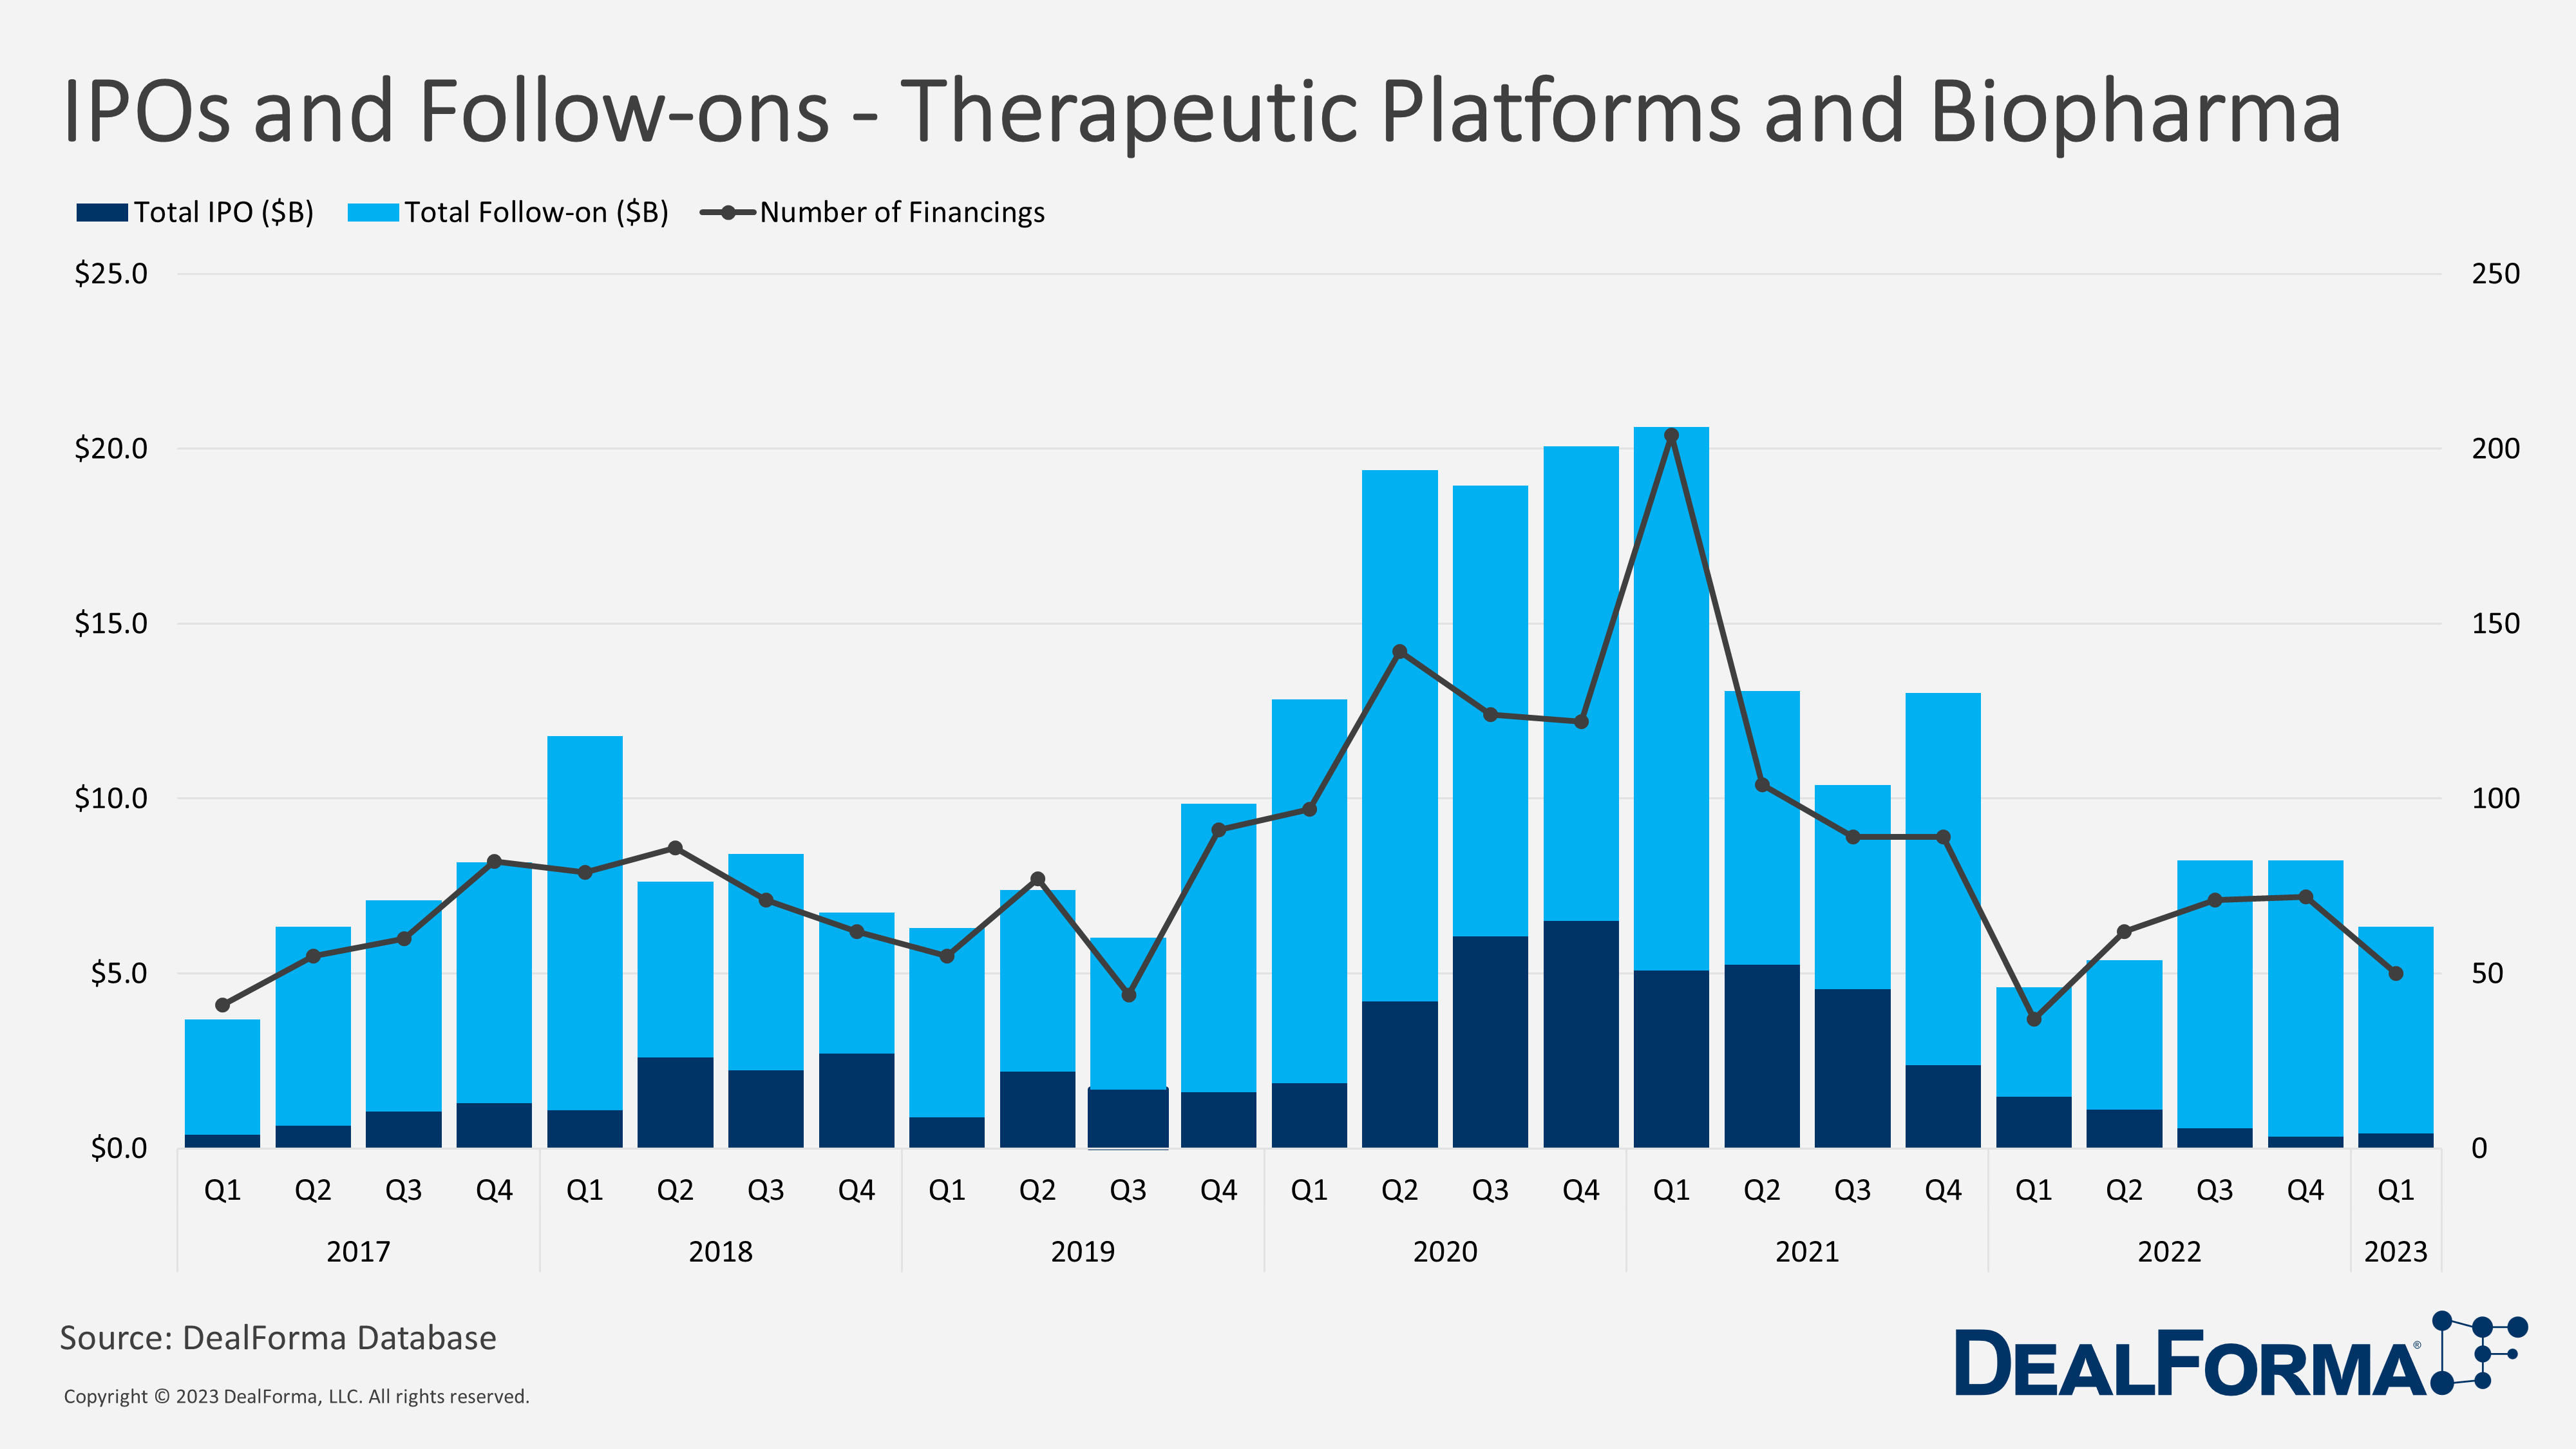 IPOs and Follow-ons - Therapeutic Platforms and Biopharma